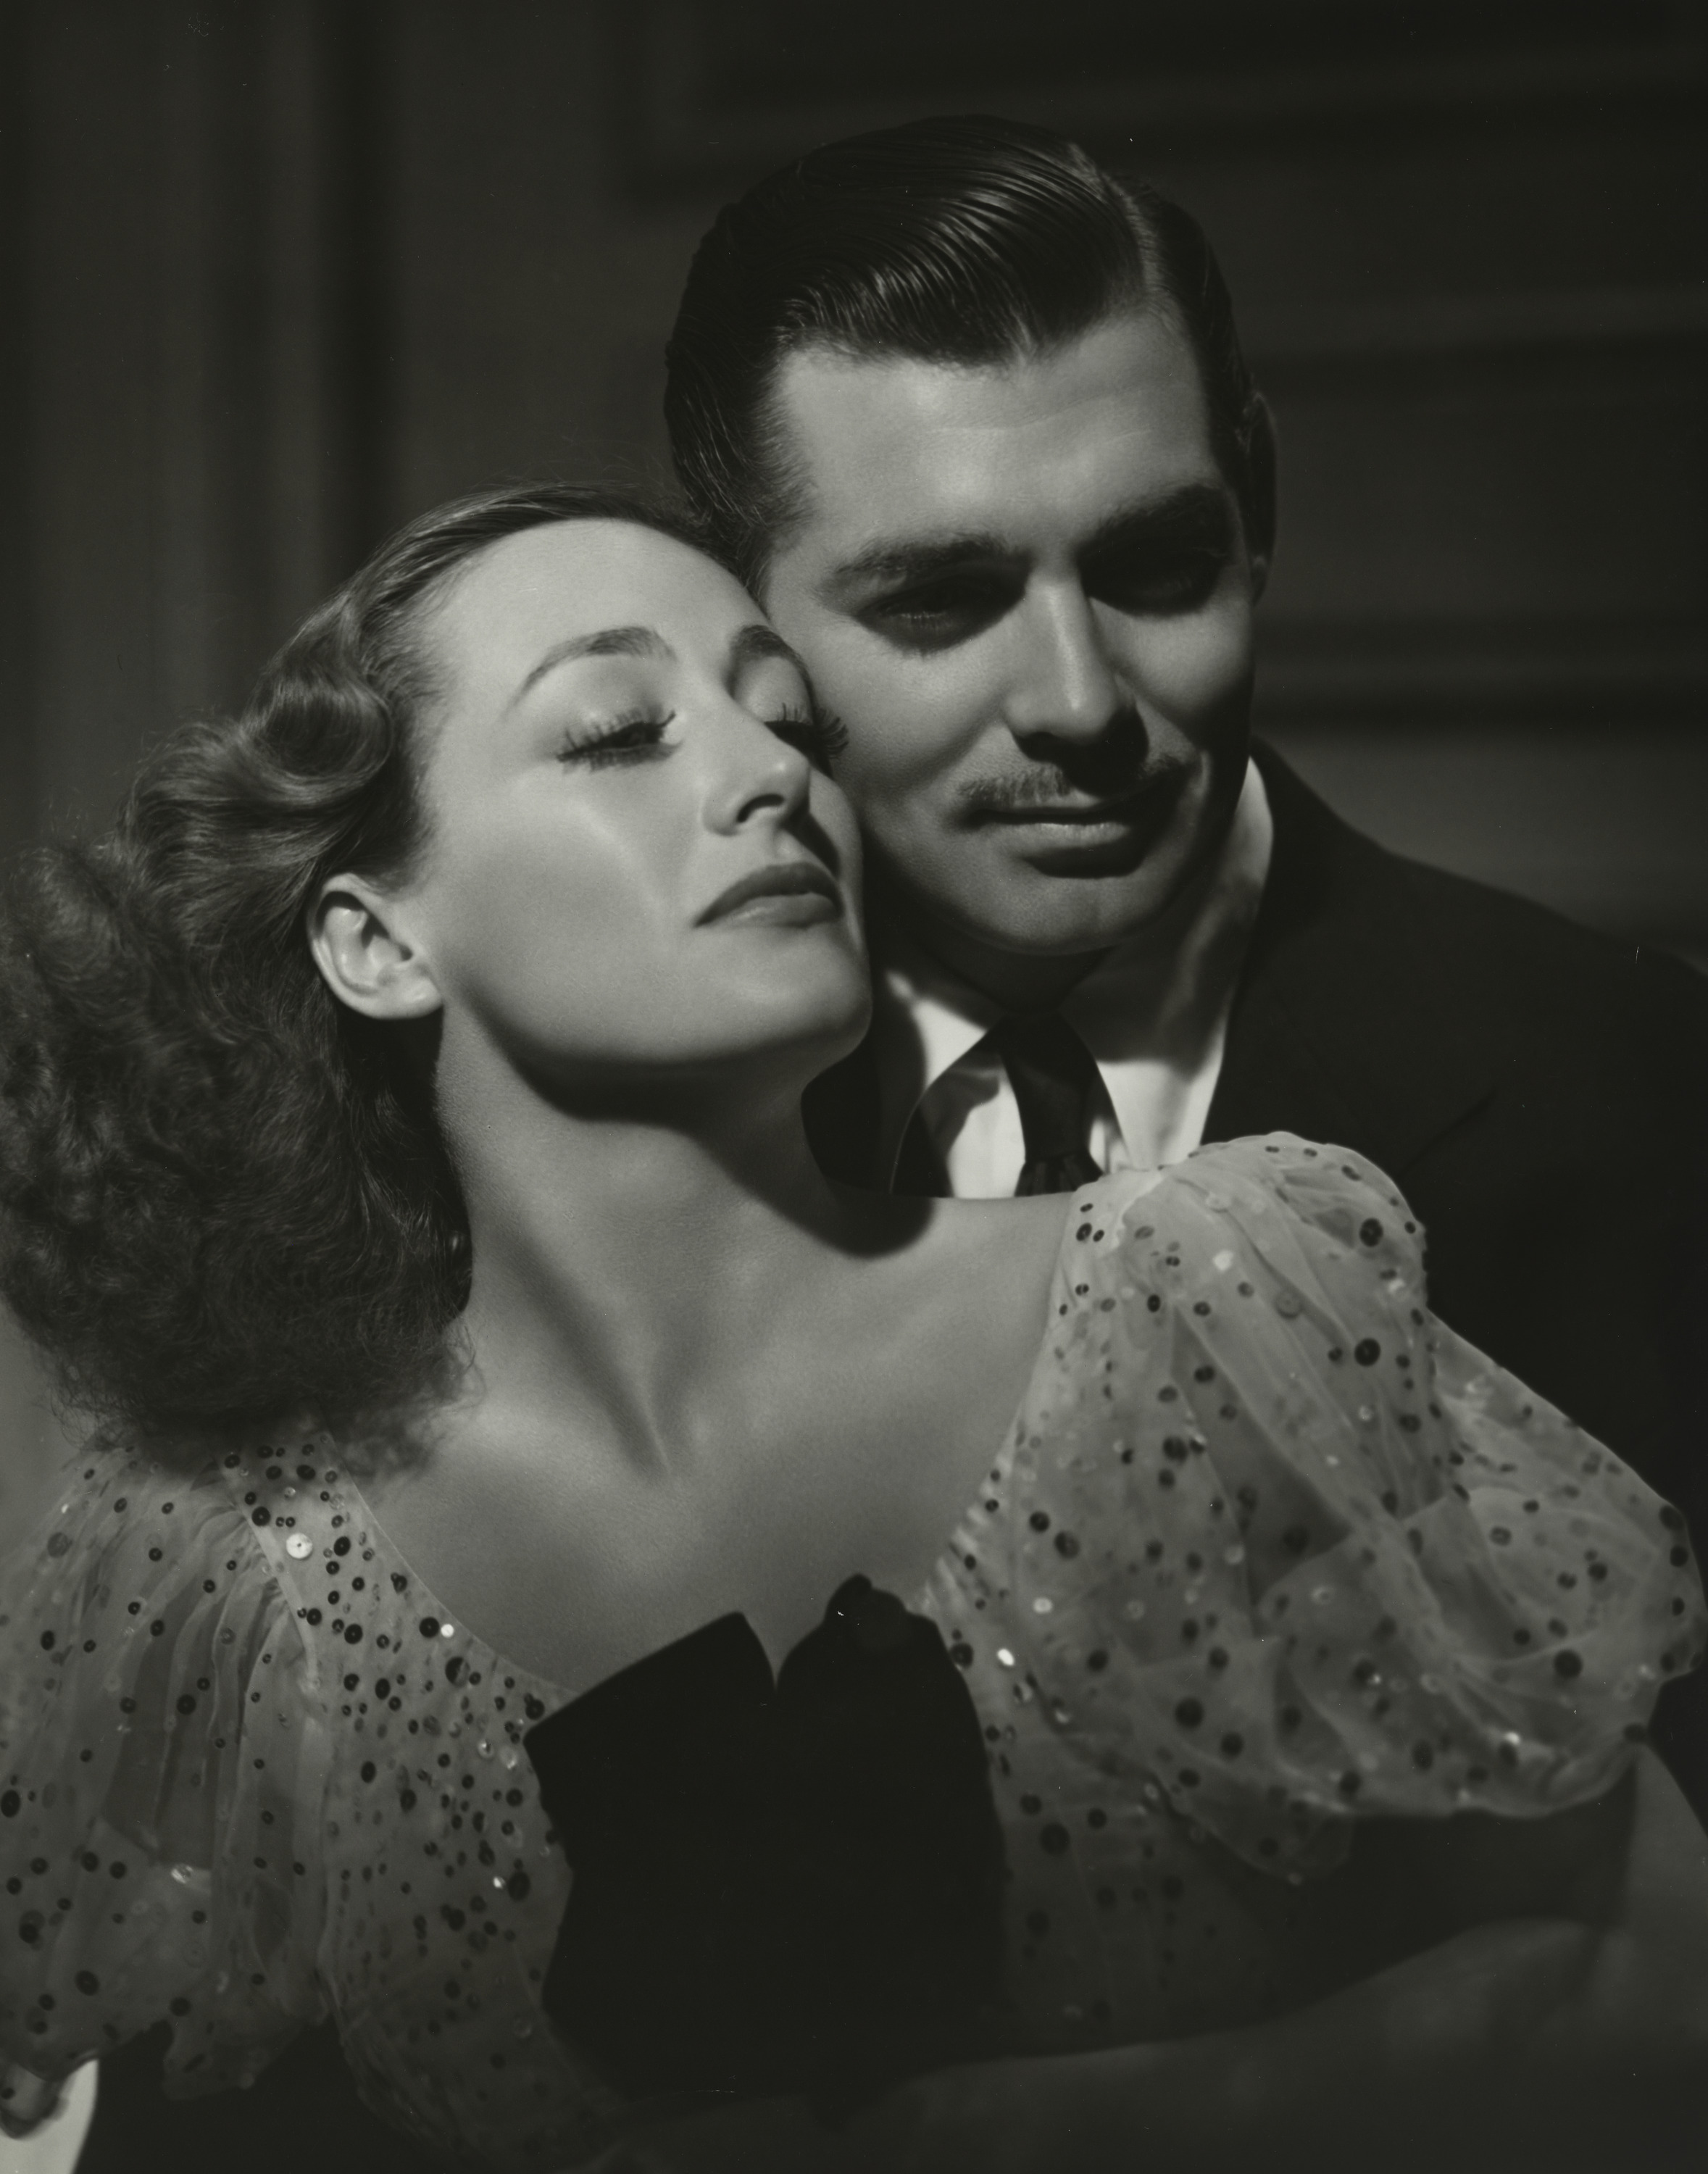 A man embraces a woman from behind in a black and white image.